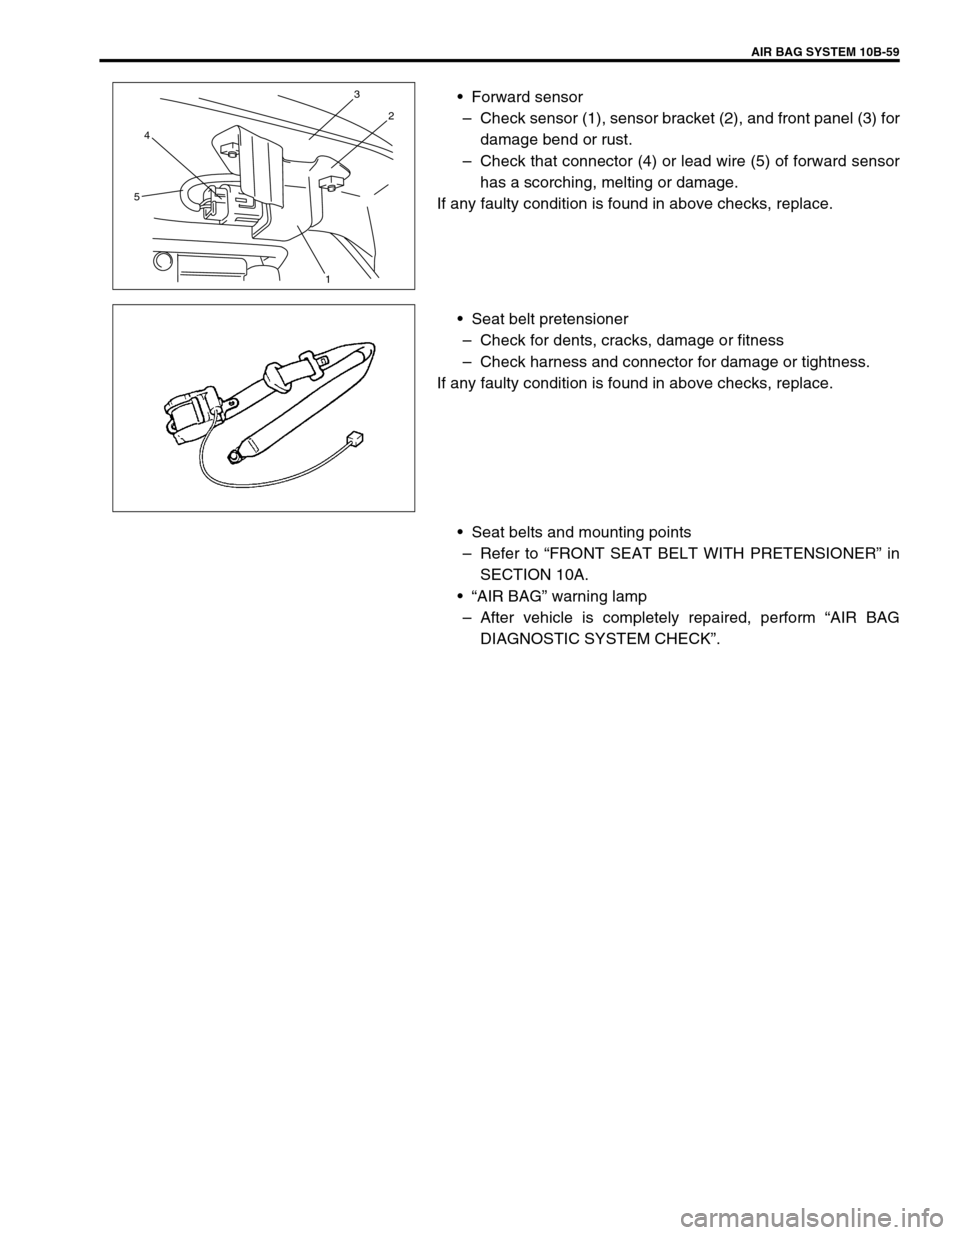 SUZUKI GRAND VITARA 2001 2.G Owners Manual AIR BAG SYSTEM 10B-59
•Forward sensor
–Check sensor (1), sensor bracket (2), and front panel (3) for
damage bend or rust.
–Check that connector (4) or lead wire (5) of forward sensor
has a scorc